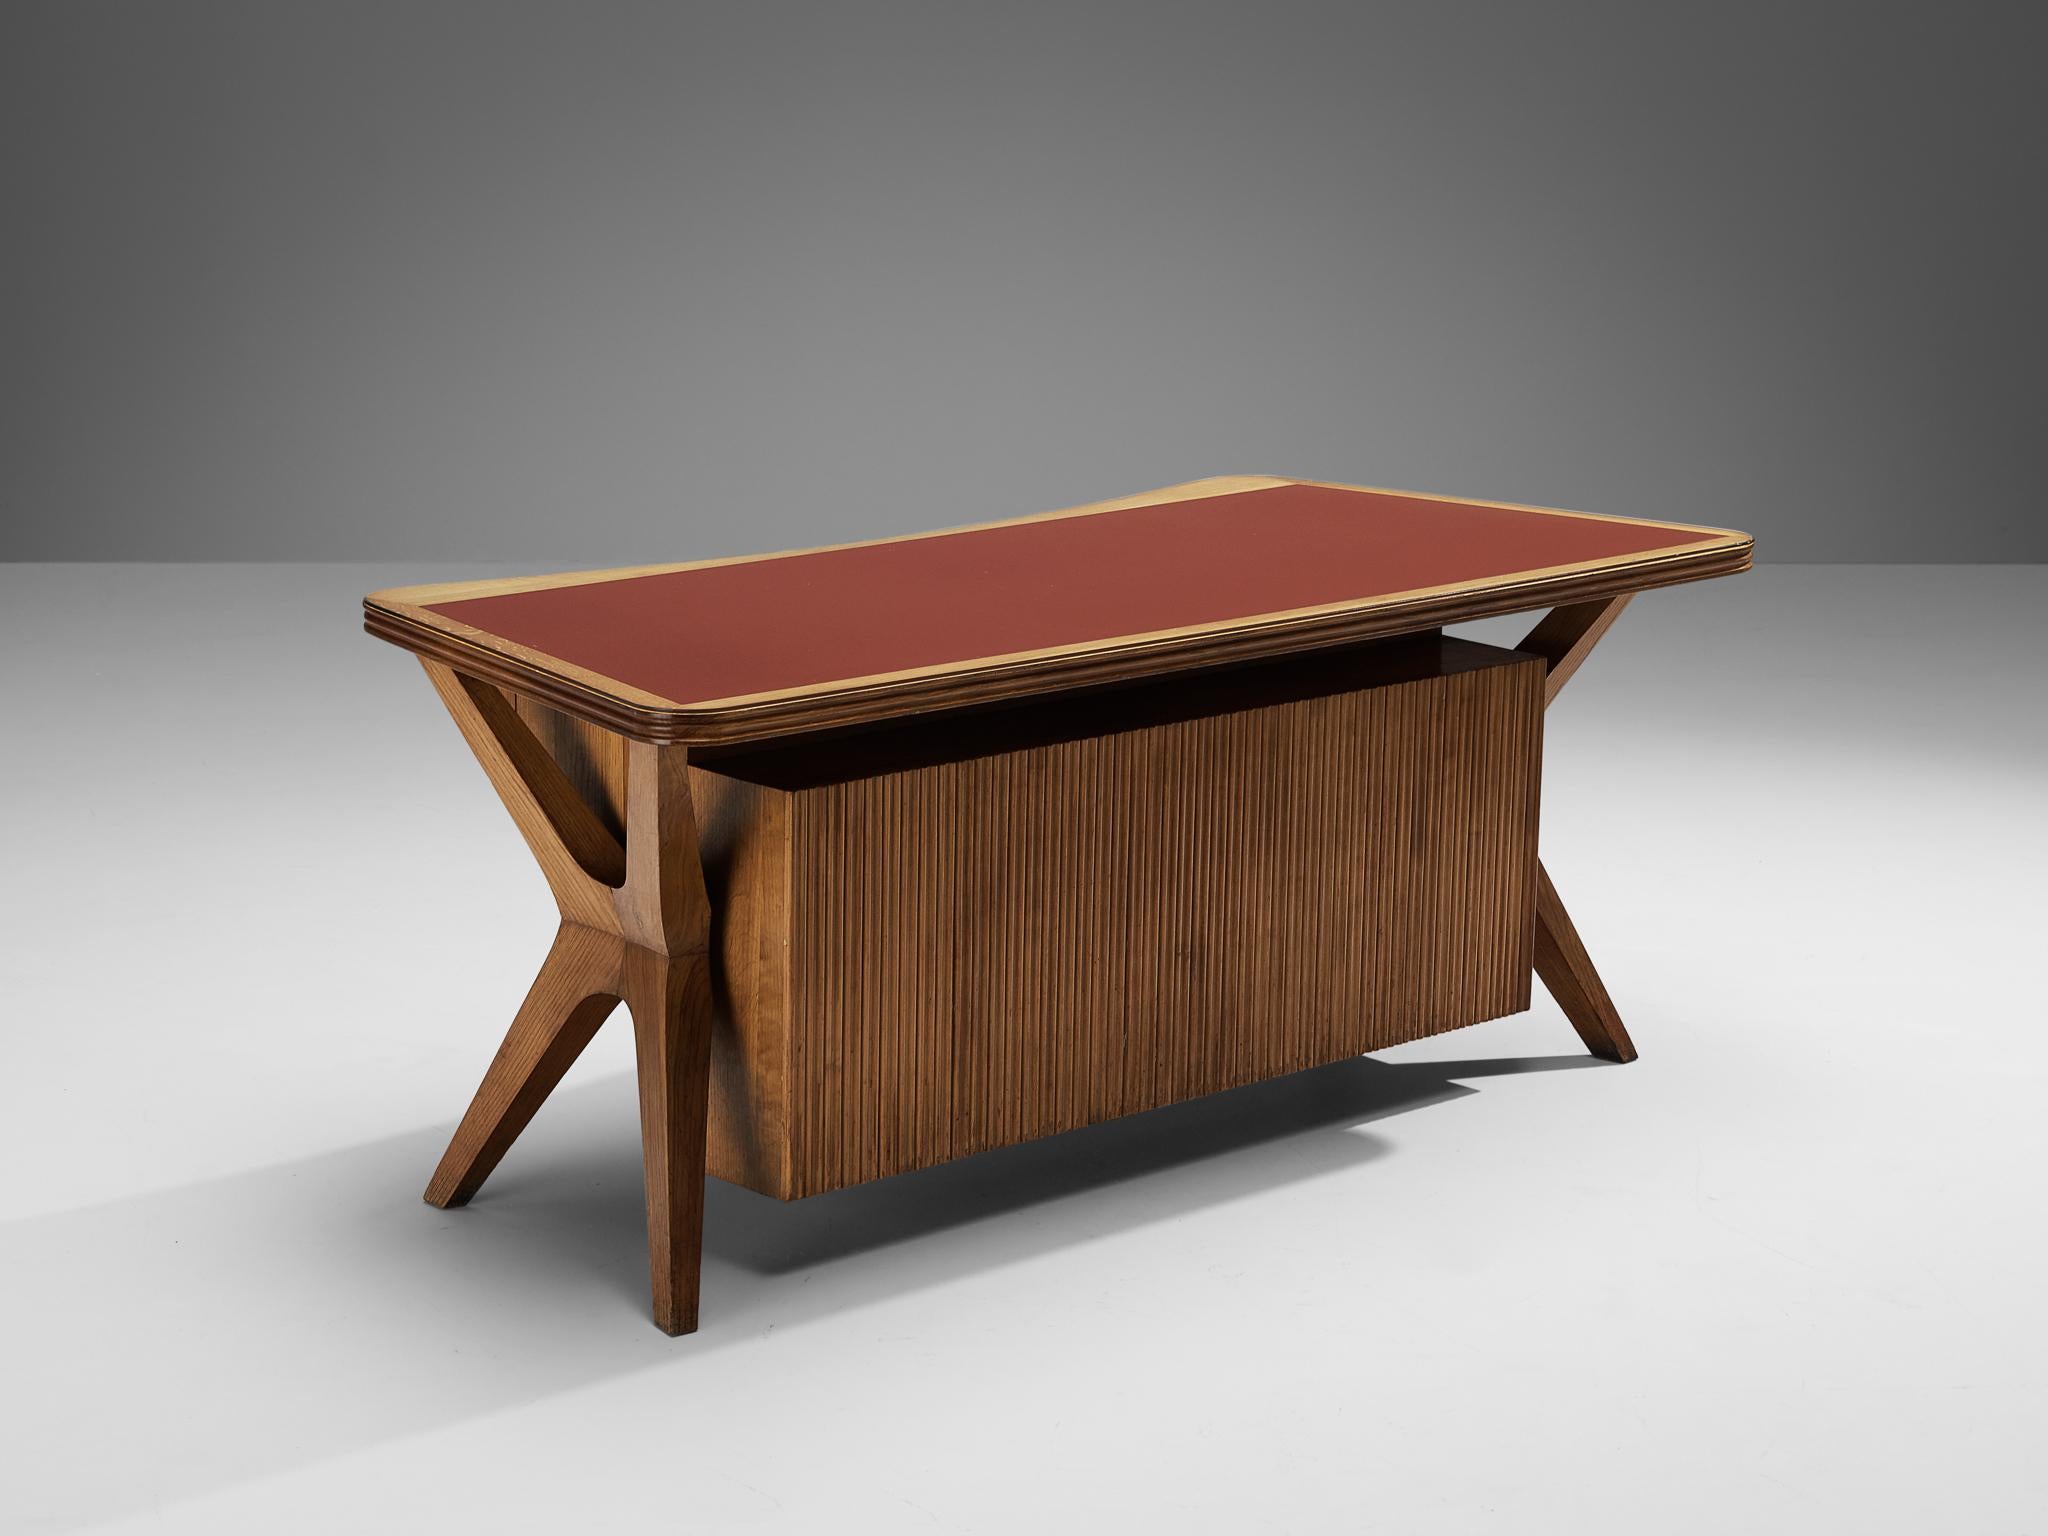 Executive desk, walnut, brass, glass, Italy, 1950s

Made in Italy, this writing desk is designed according to the midcentury design principles that were in vogue in the fifties. The desk bears witness to the designer's excellent taste for form and